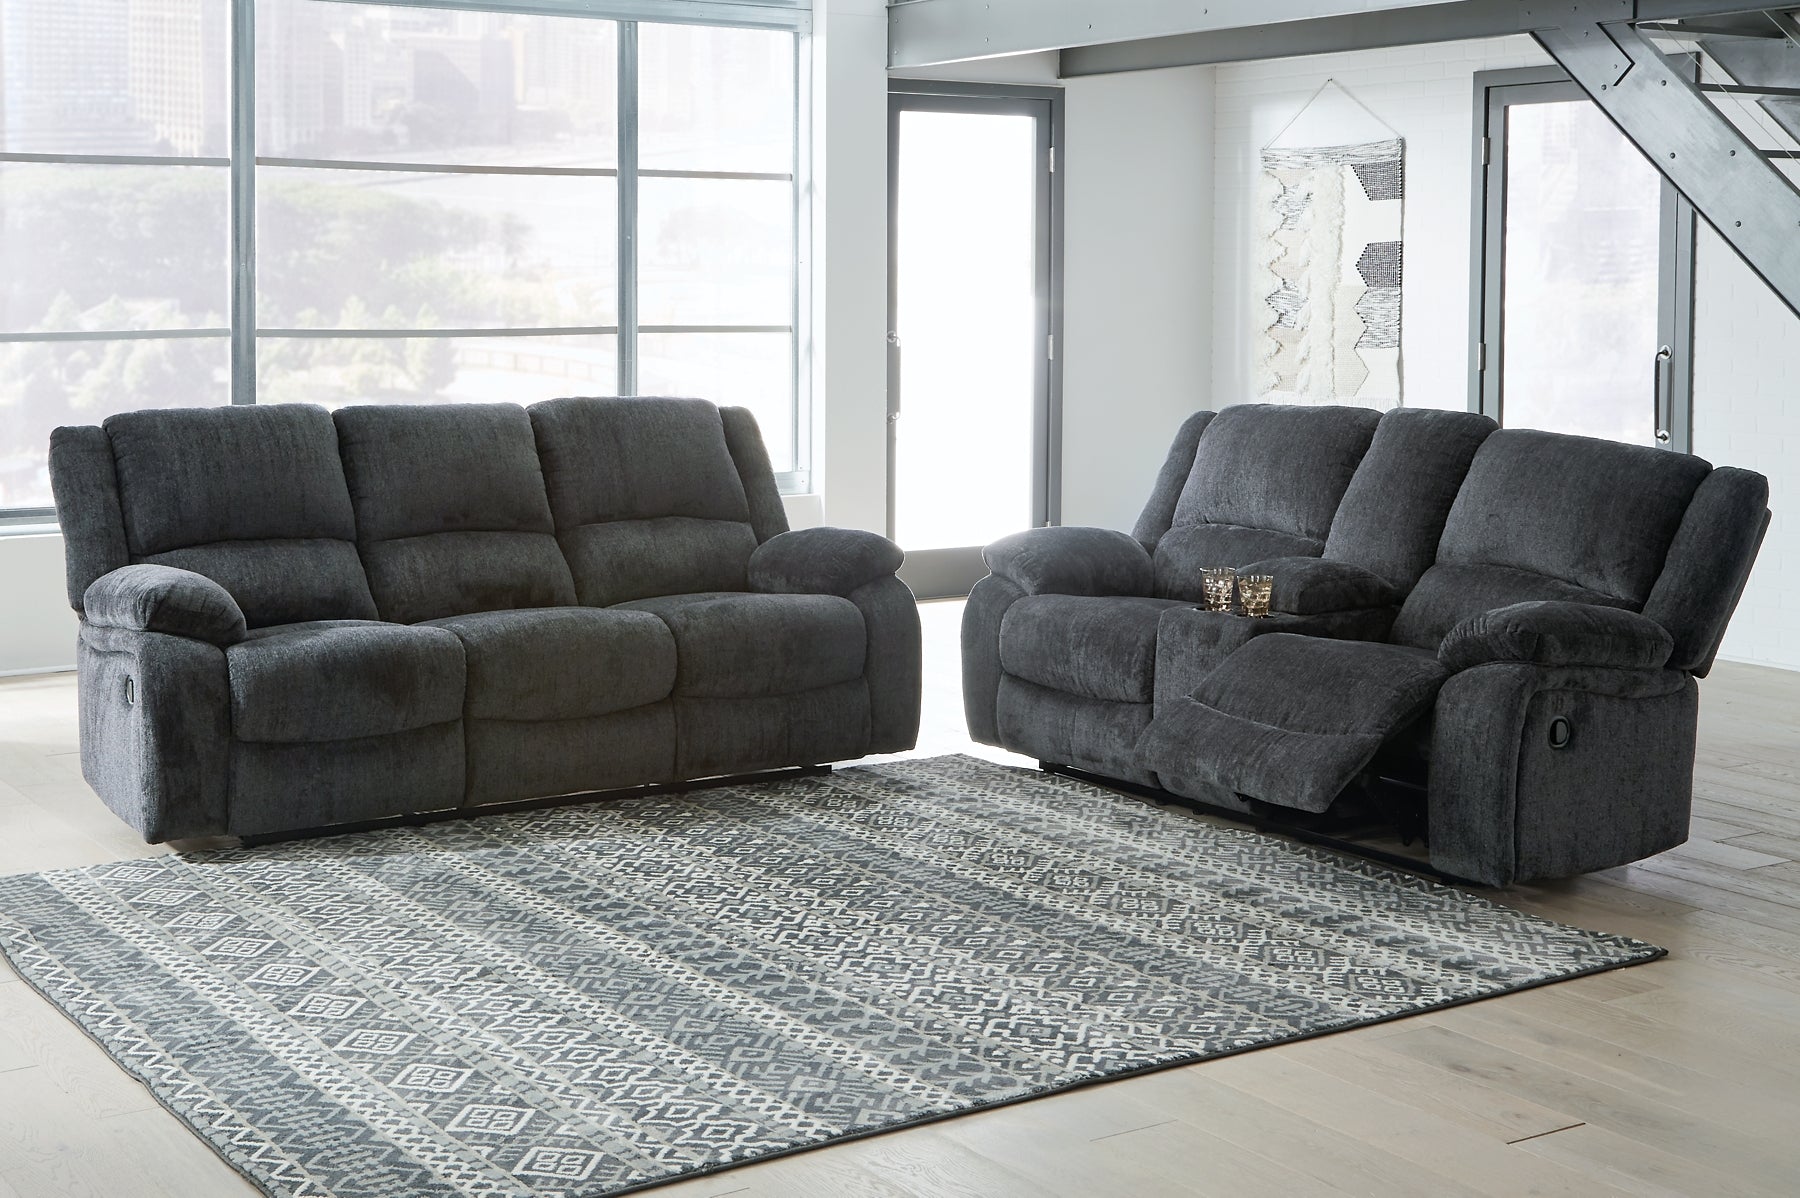 Draycoll Sofa and Loveseat at Walker Mattress and Furniture Locations in Cedar Park and Belton TX.